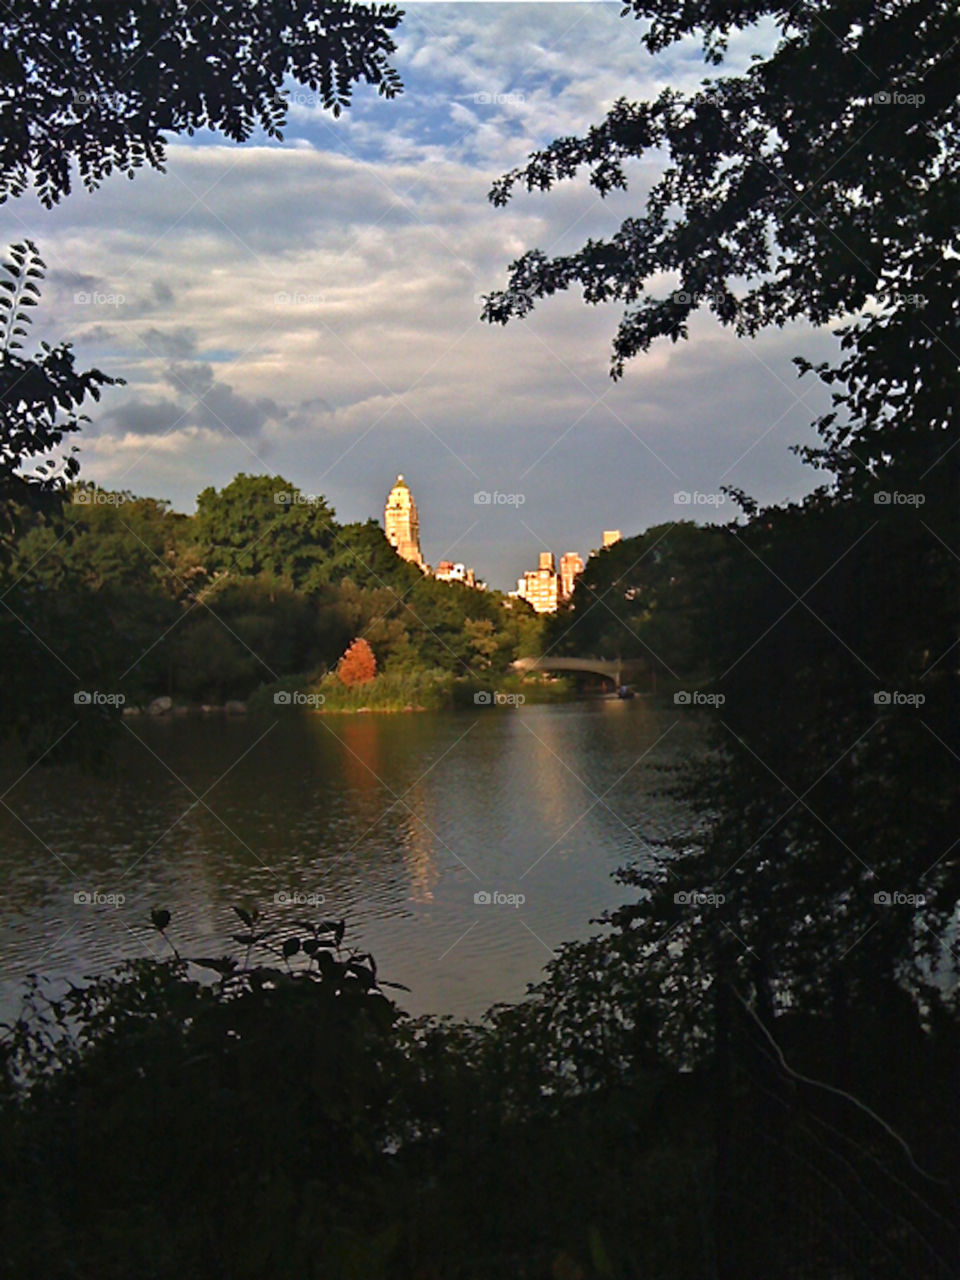 Central Park gloaming. Sunset illuminated buildings reflect on the Central Park pond at twilight.